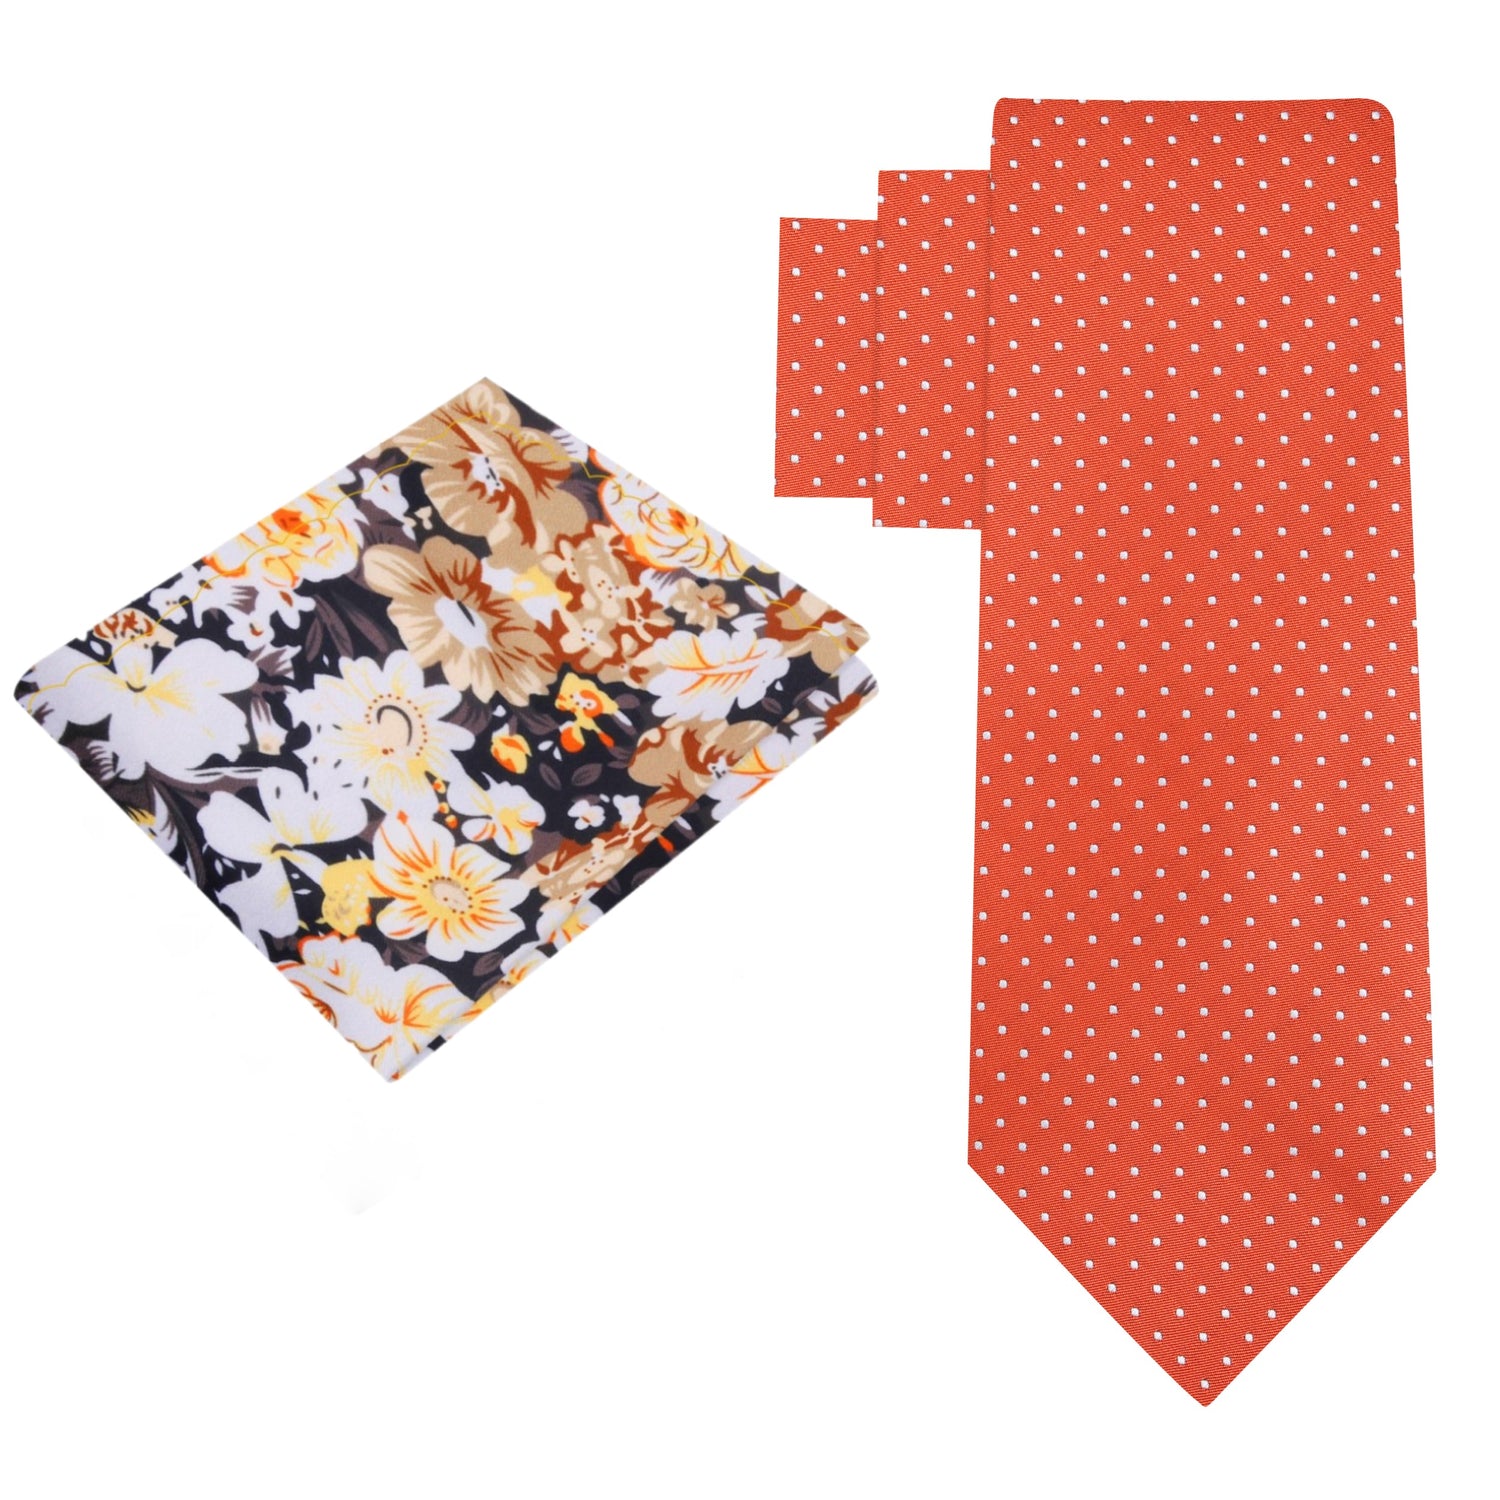 Alt View: Orange with White Polka Necktie and Accenting Brown Floral Square